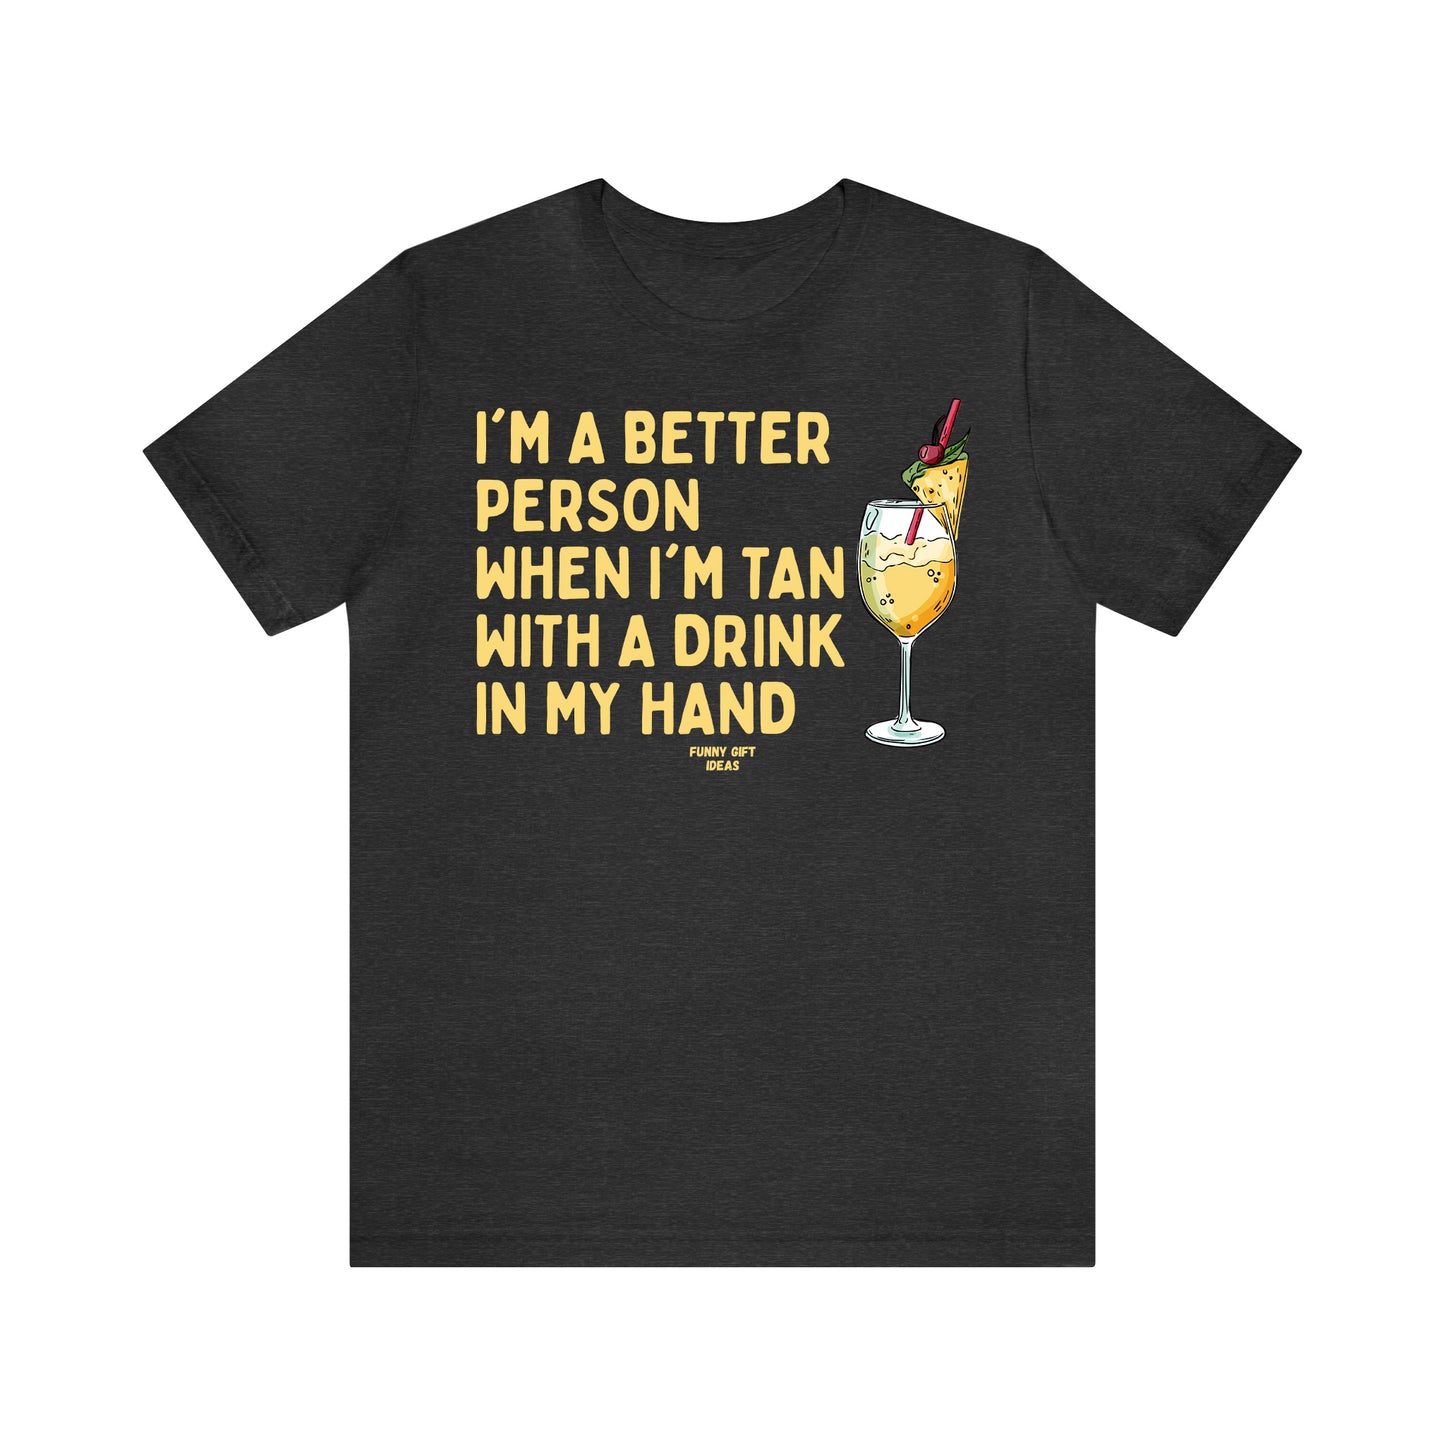 Funny Shirts for Women - I'm a Better Person When I'm Tan With a Drink in My Hand - Women's T Shirts